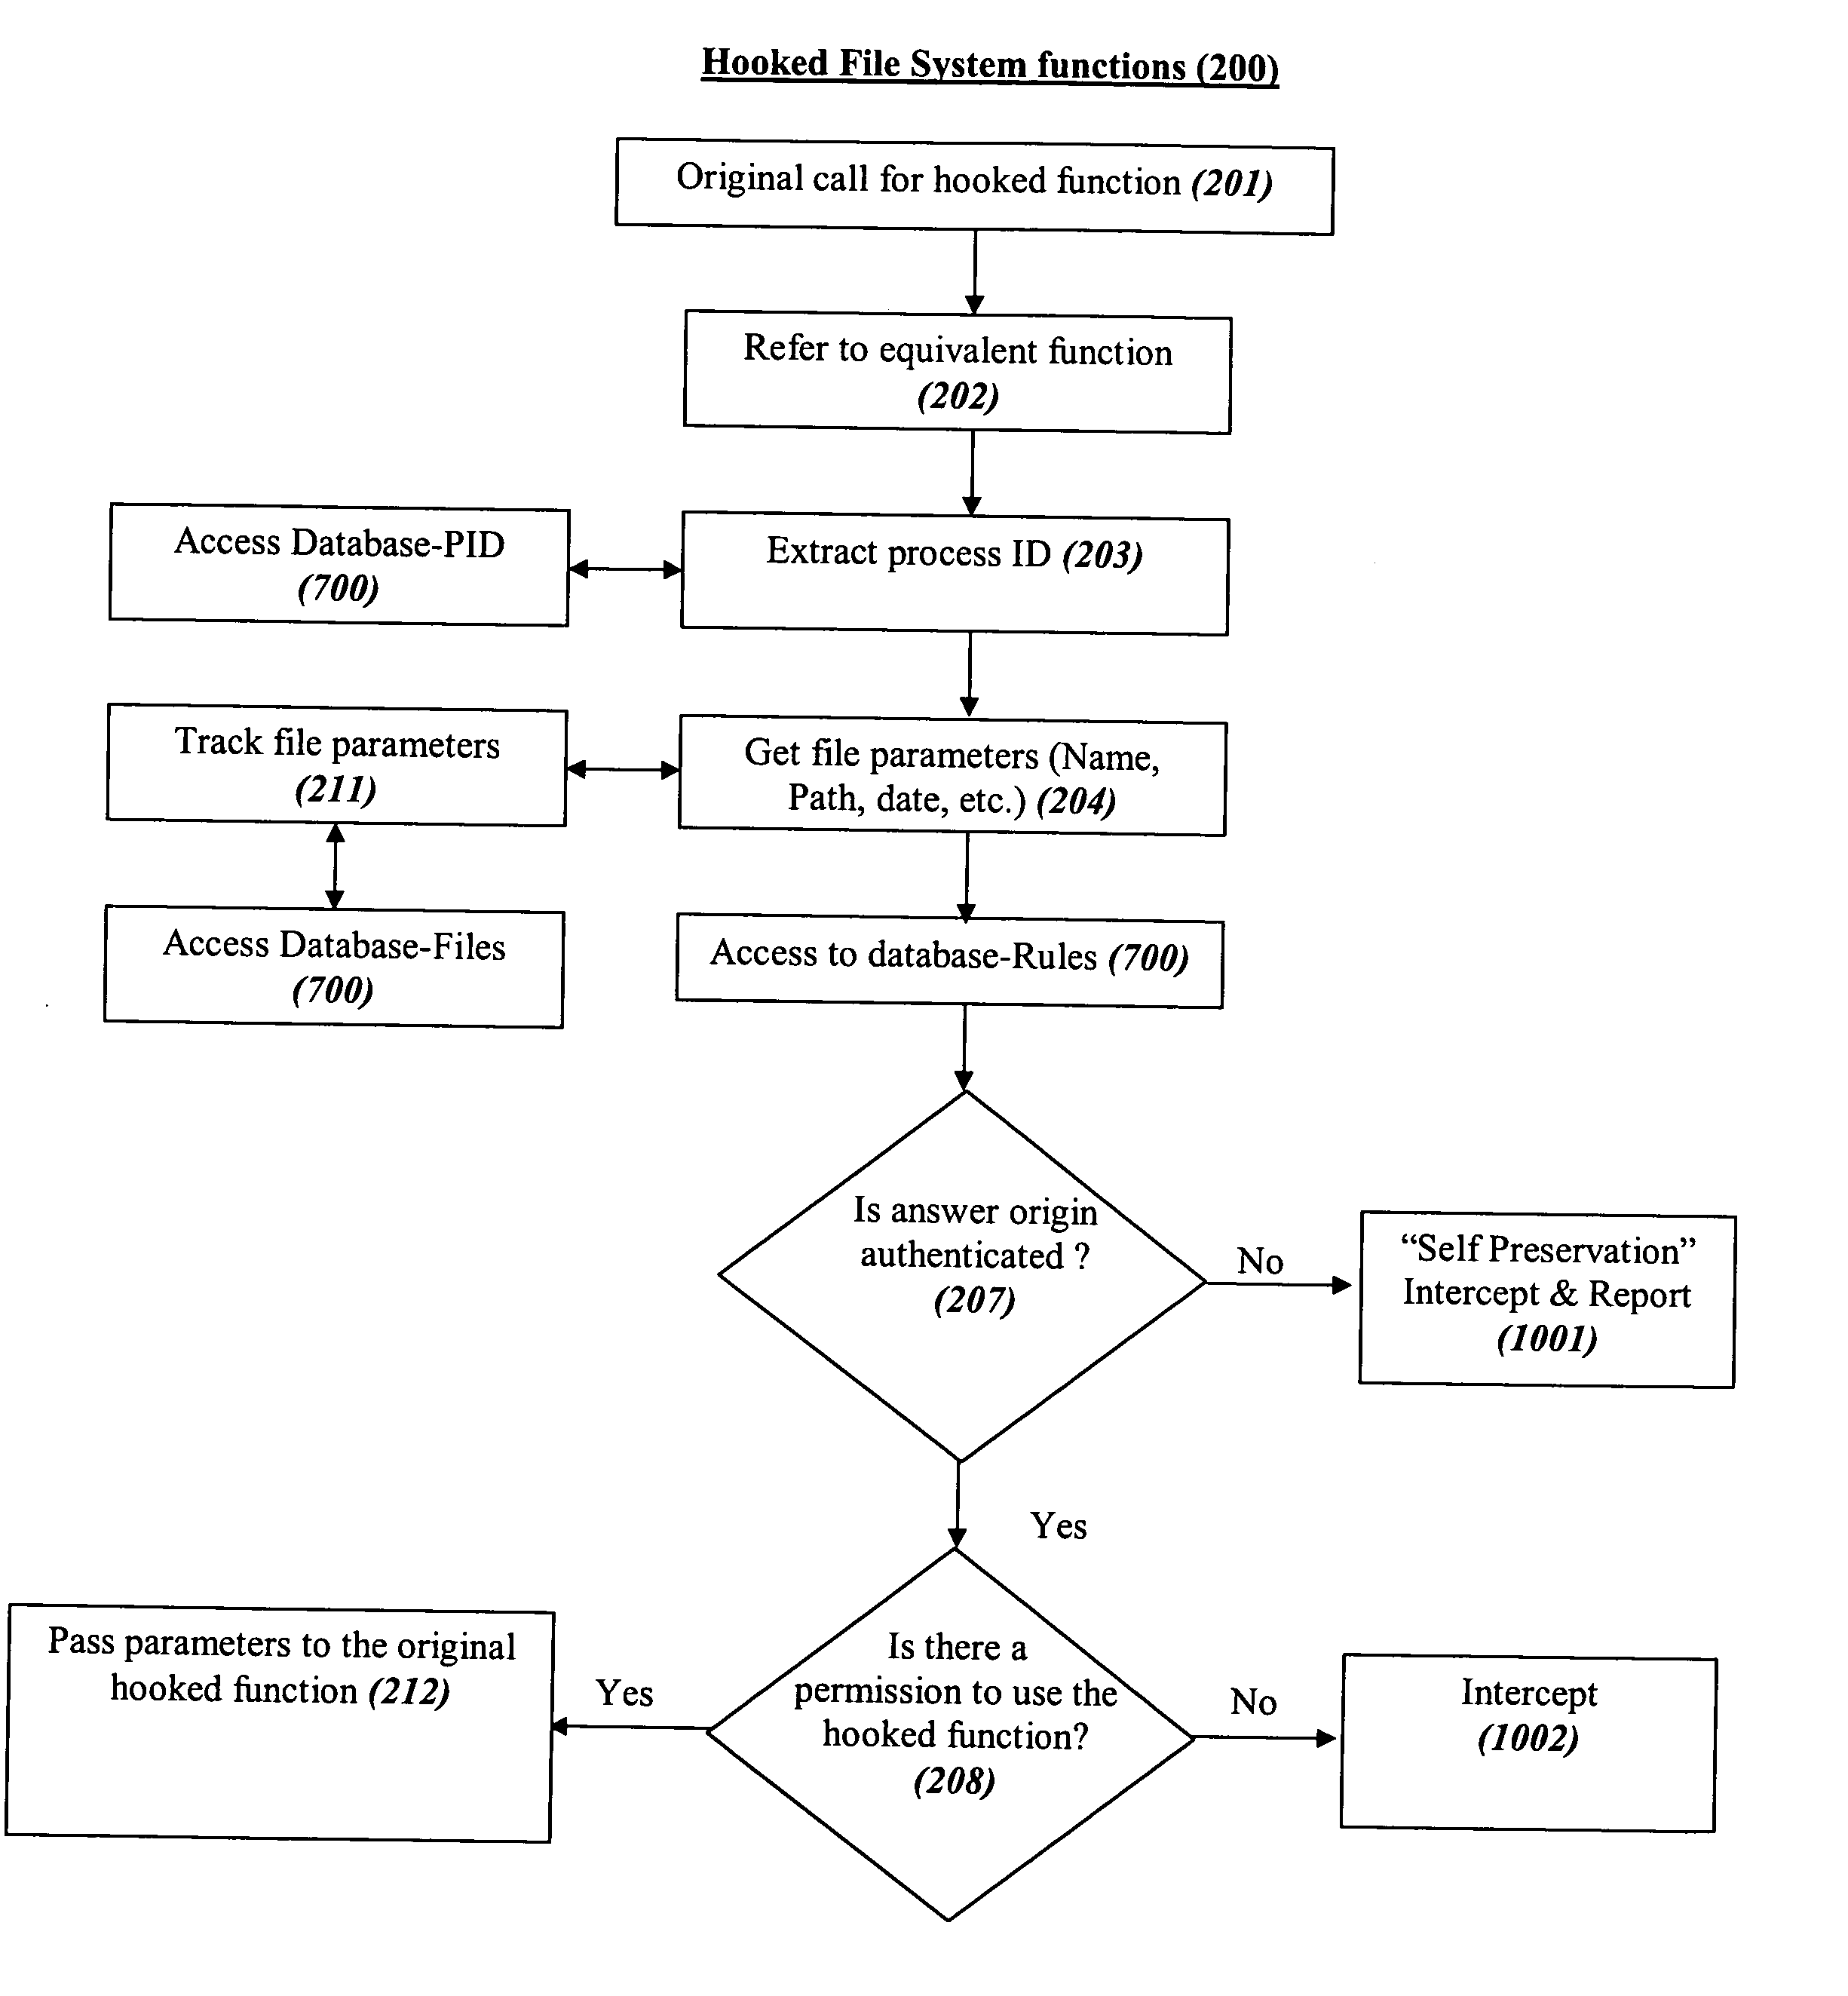 System and method for comprehensive general electric protection for computers against malicious programs that may steal information and/or cause damages